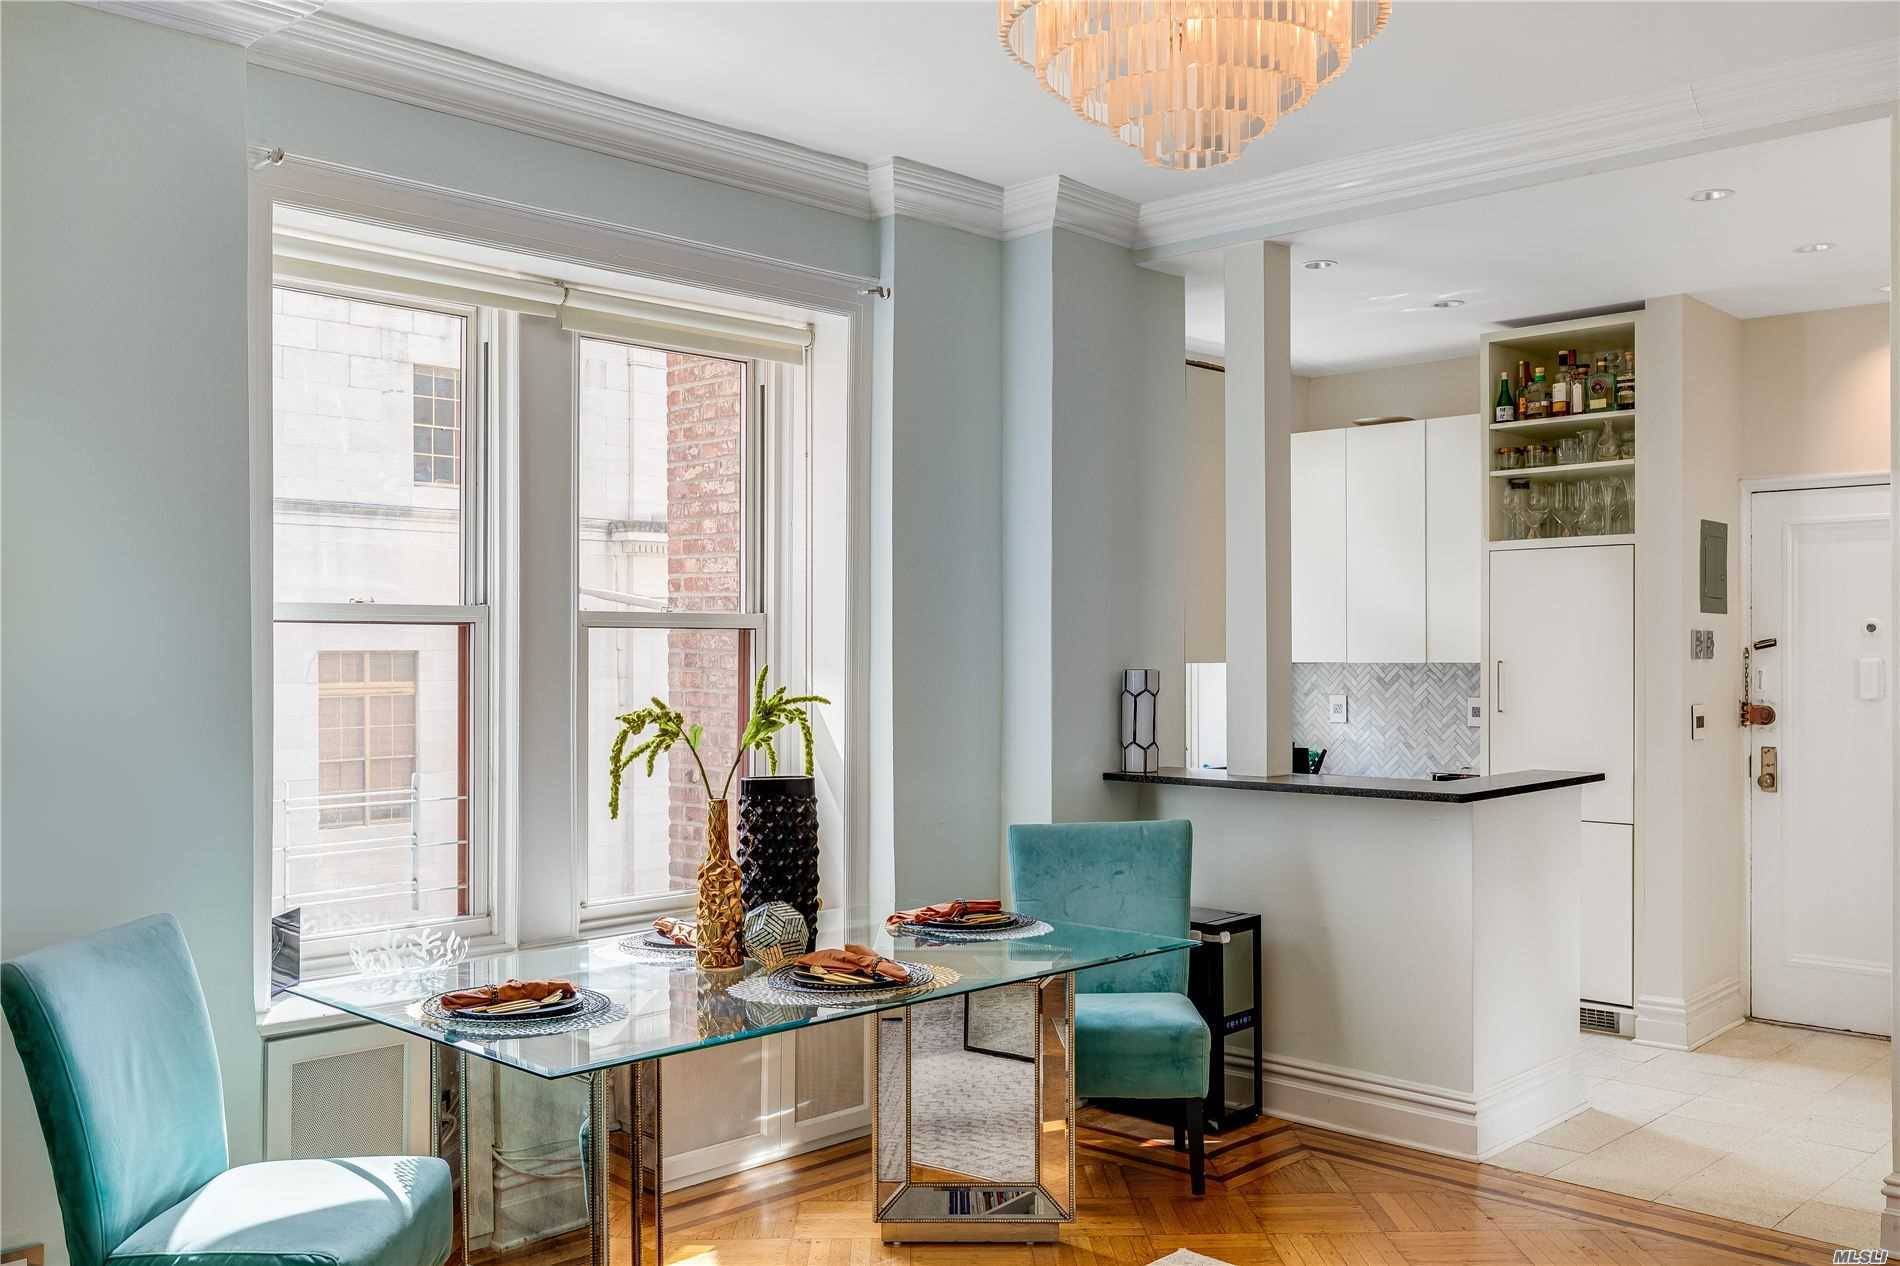 Look no further. Spacious 2 BR, 1 bath Coop in a pre war elevator building centrally located in Historic Brooklyn Heights.